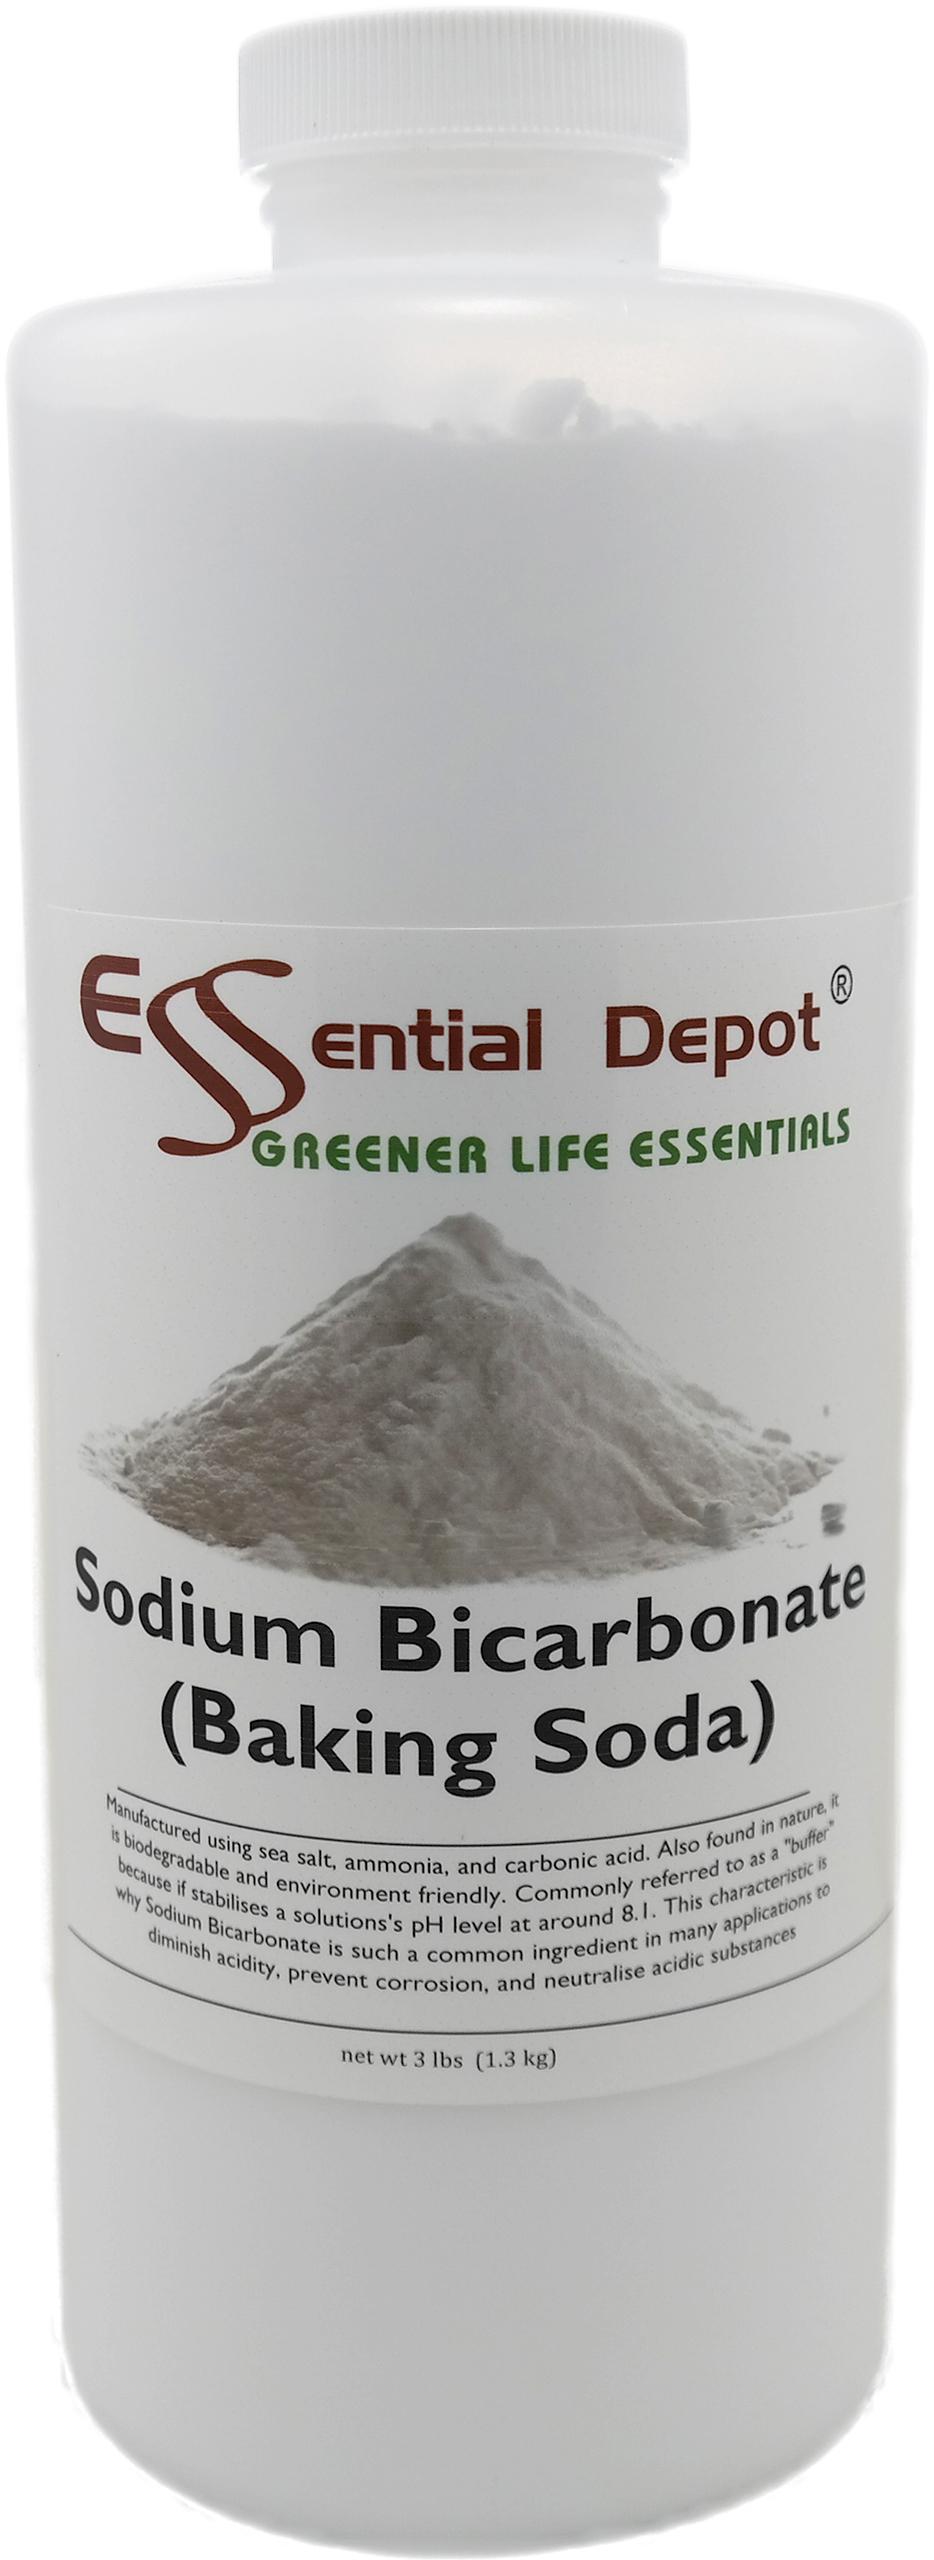 Sodium Hydroxide Lye Micro Beads - Food Grade - USP - 2 lbs - Makes best  soap and great for pretzels